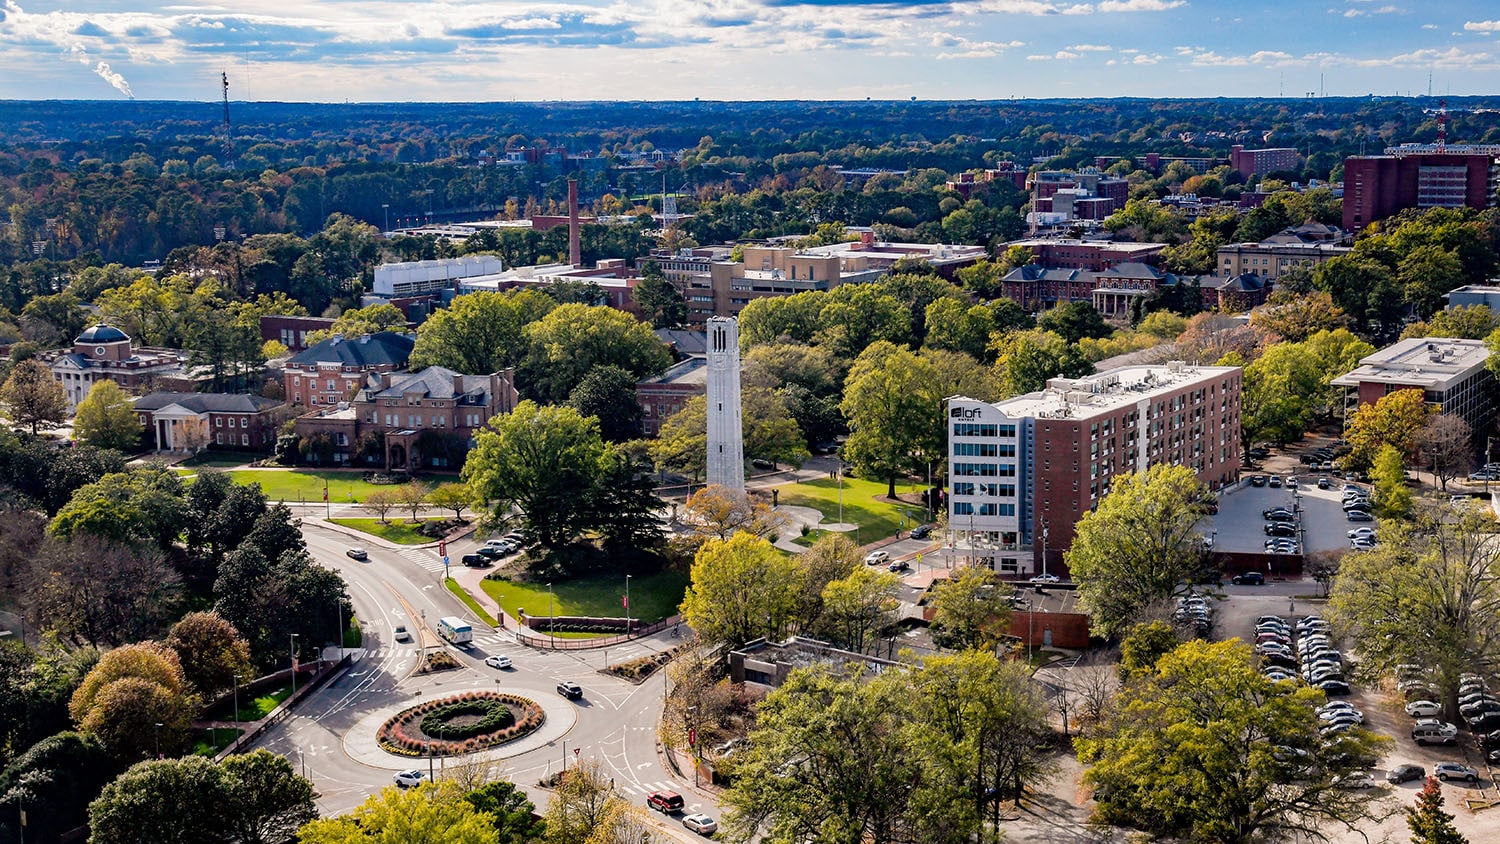 An aerial view of NC&#160;State's main campus, with the Memorial Belltower featured in the center foreground.